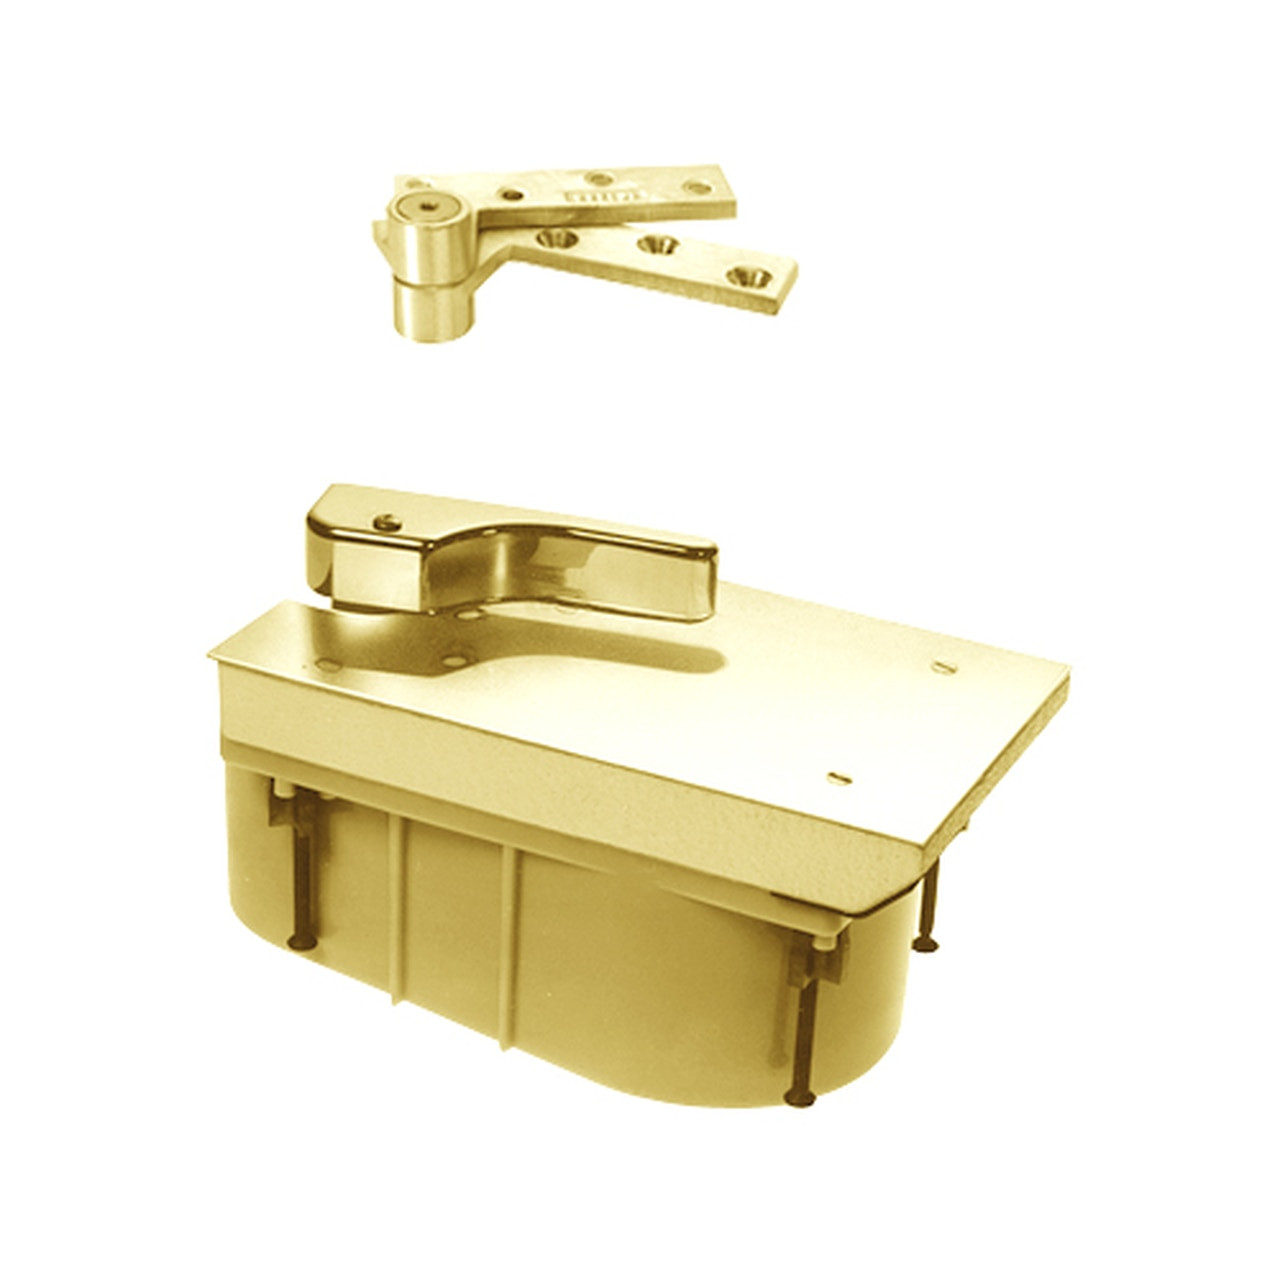 Q27-85S-LFP-LCC-LH-605 Rixson 27 Series Heavy Duty Quick Install Offset Hung Floor Closer in Bright Brass Finish